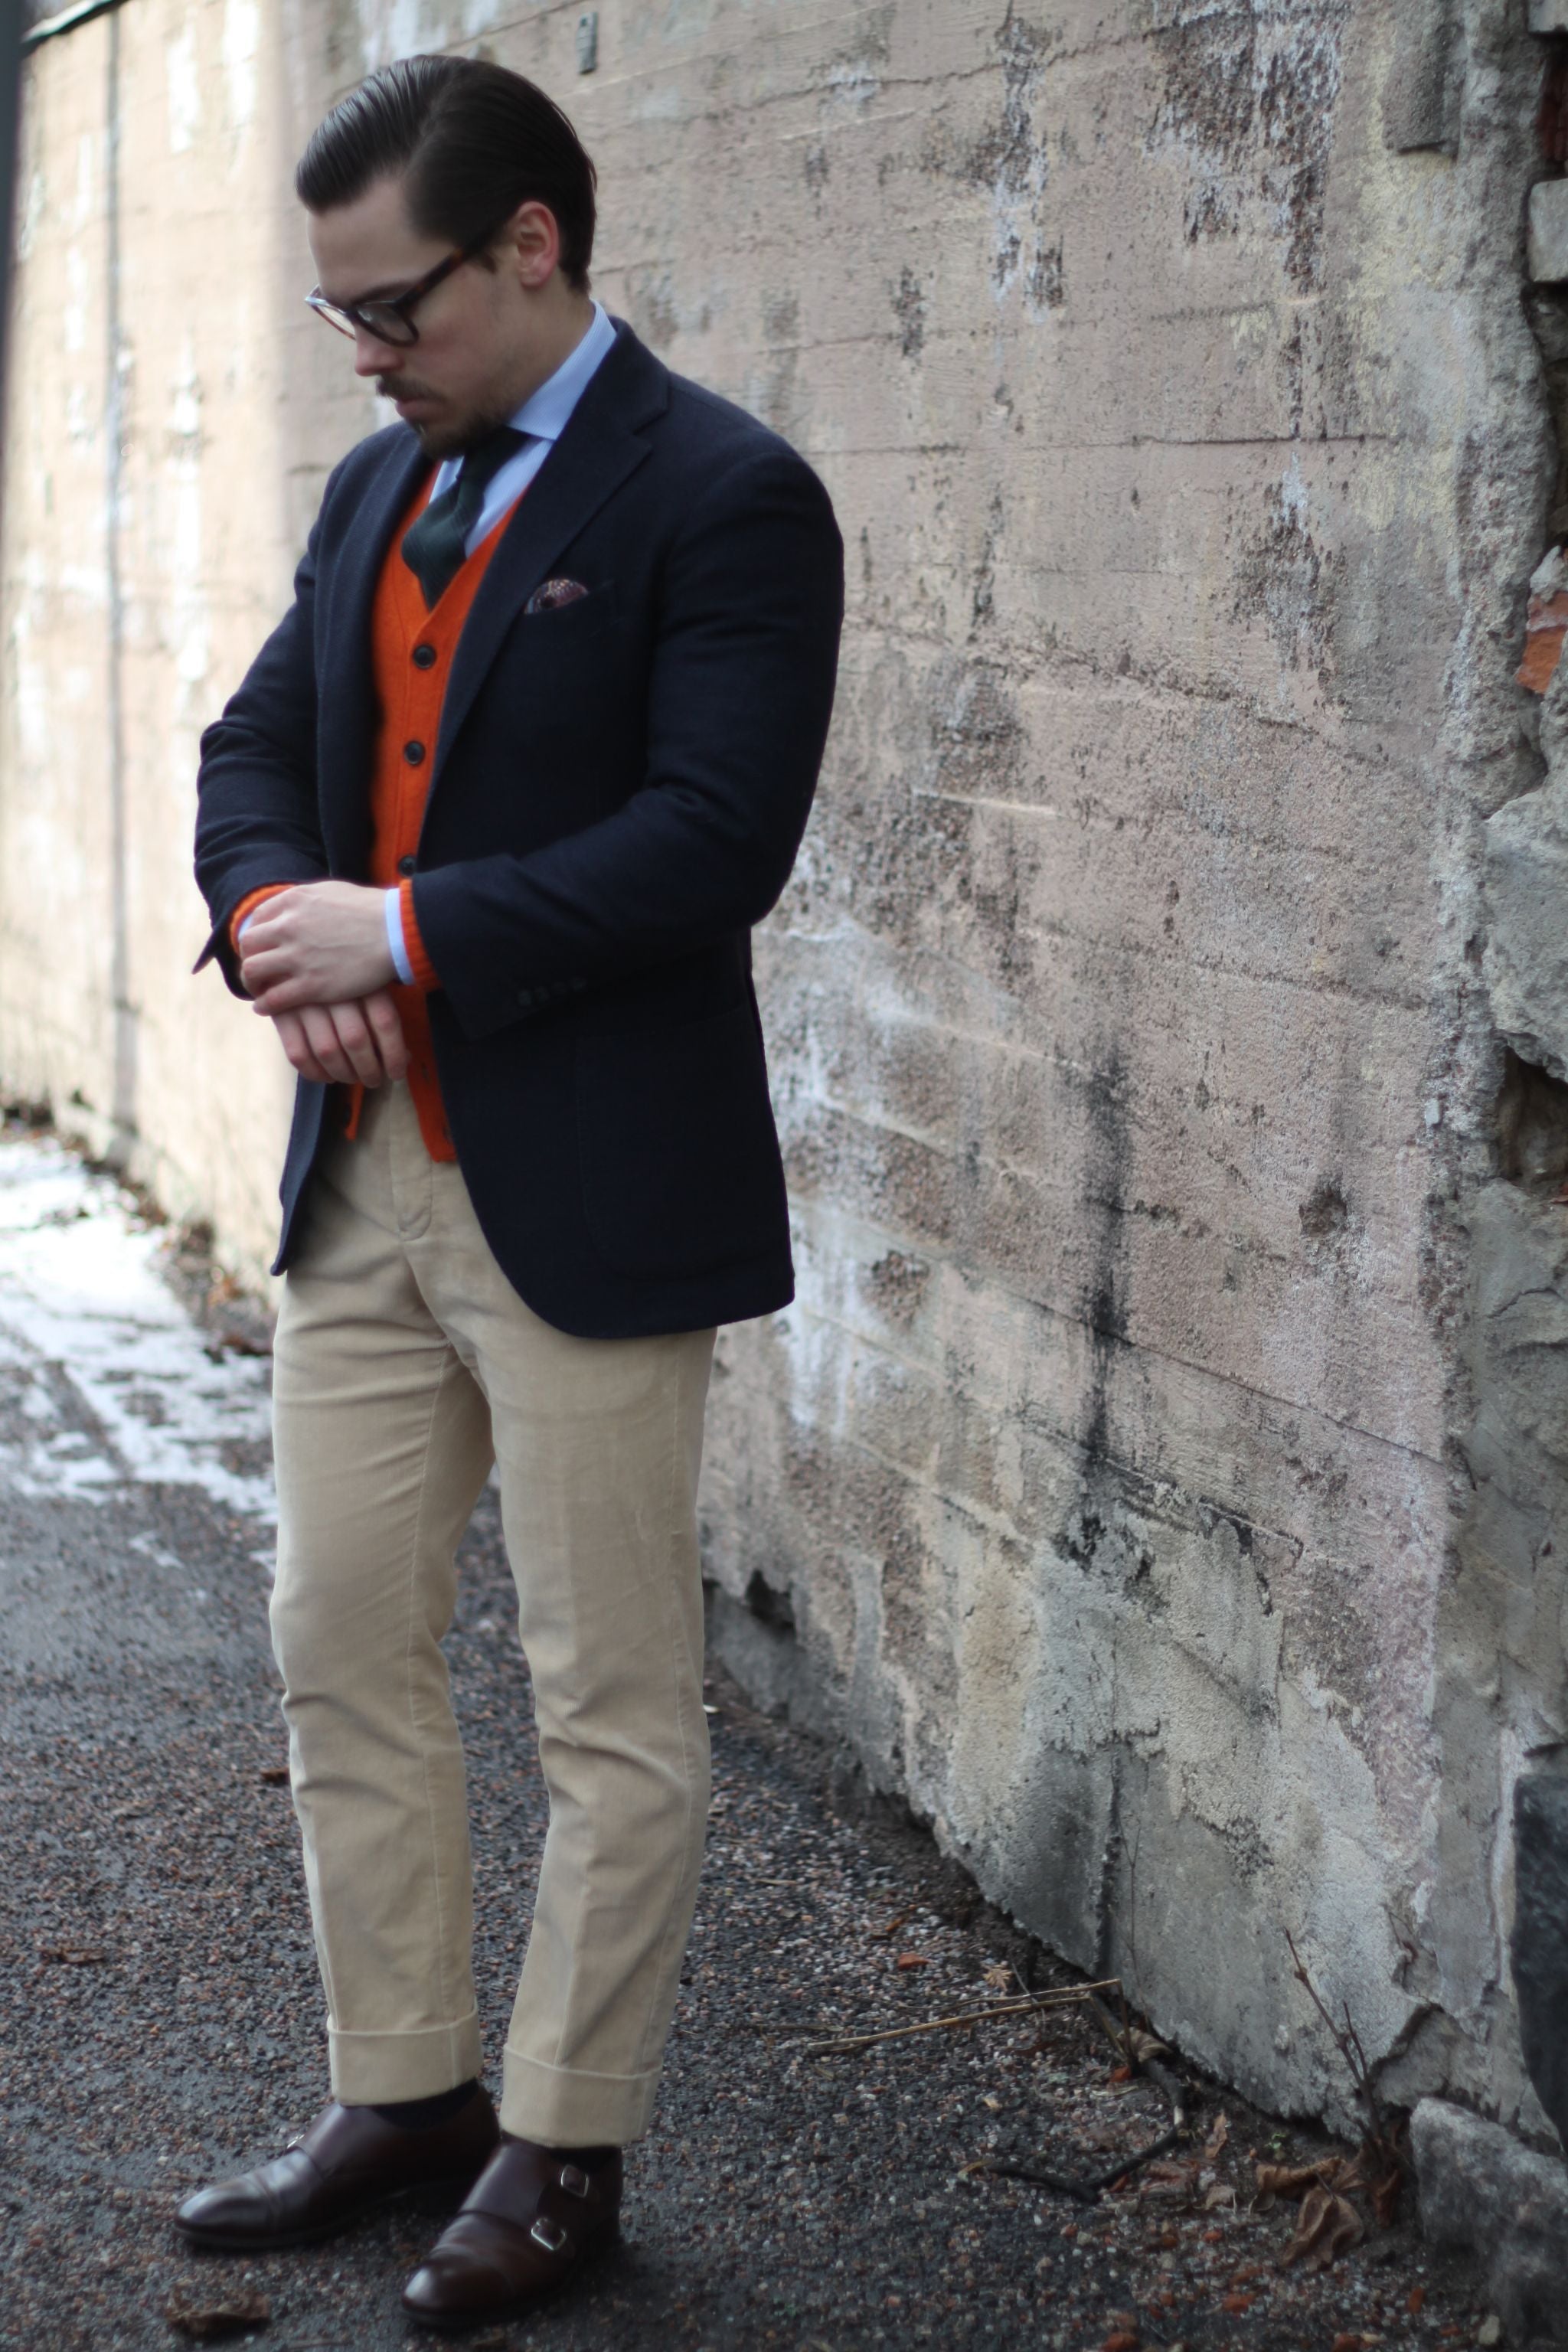 Cardigan with sport coat - blue blazer with cardigan, sand colored trousers and brown double monks by Carmina